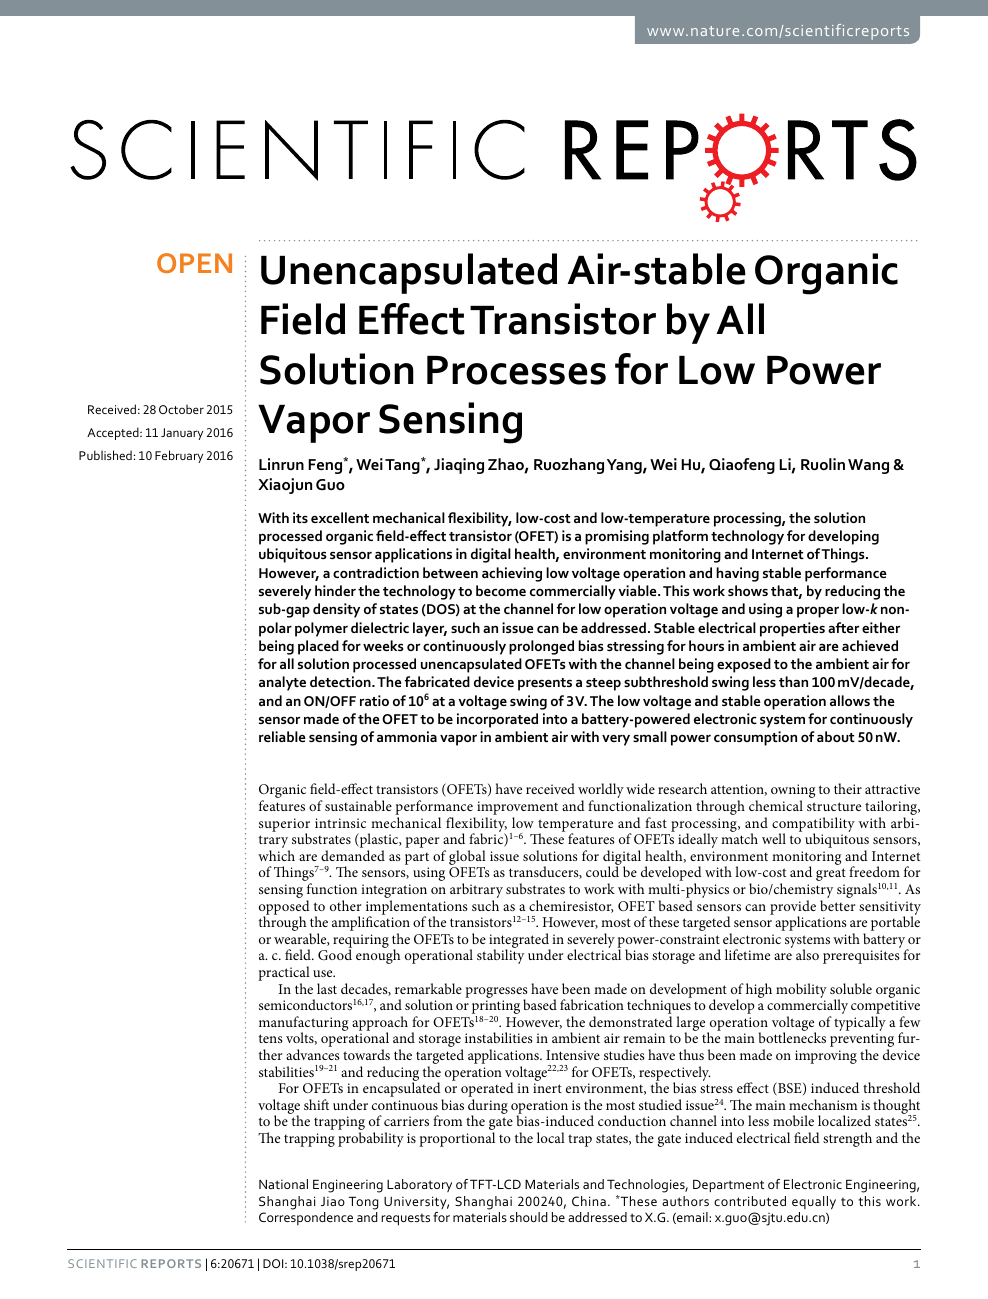 Unencapsulated Air Stable Organic Field Effect Transistor By All Solution Processes For Low Power Vapor Sensing Topic Of Research Paper In Nano Technology Download Scholarly Article Pdf And Read For Free On Cyberleninka